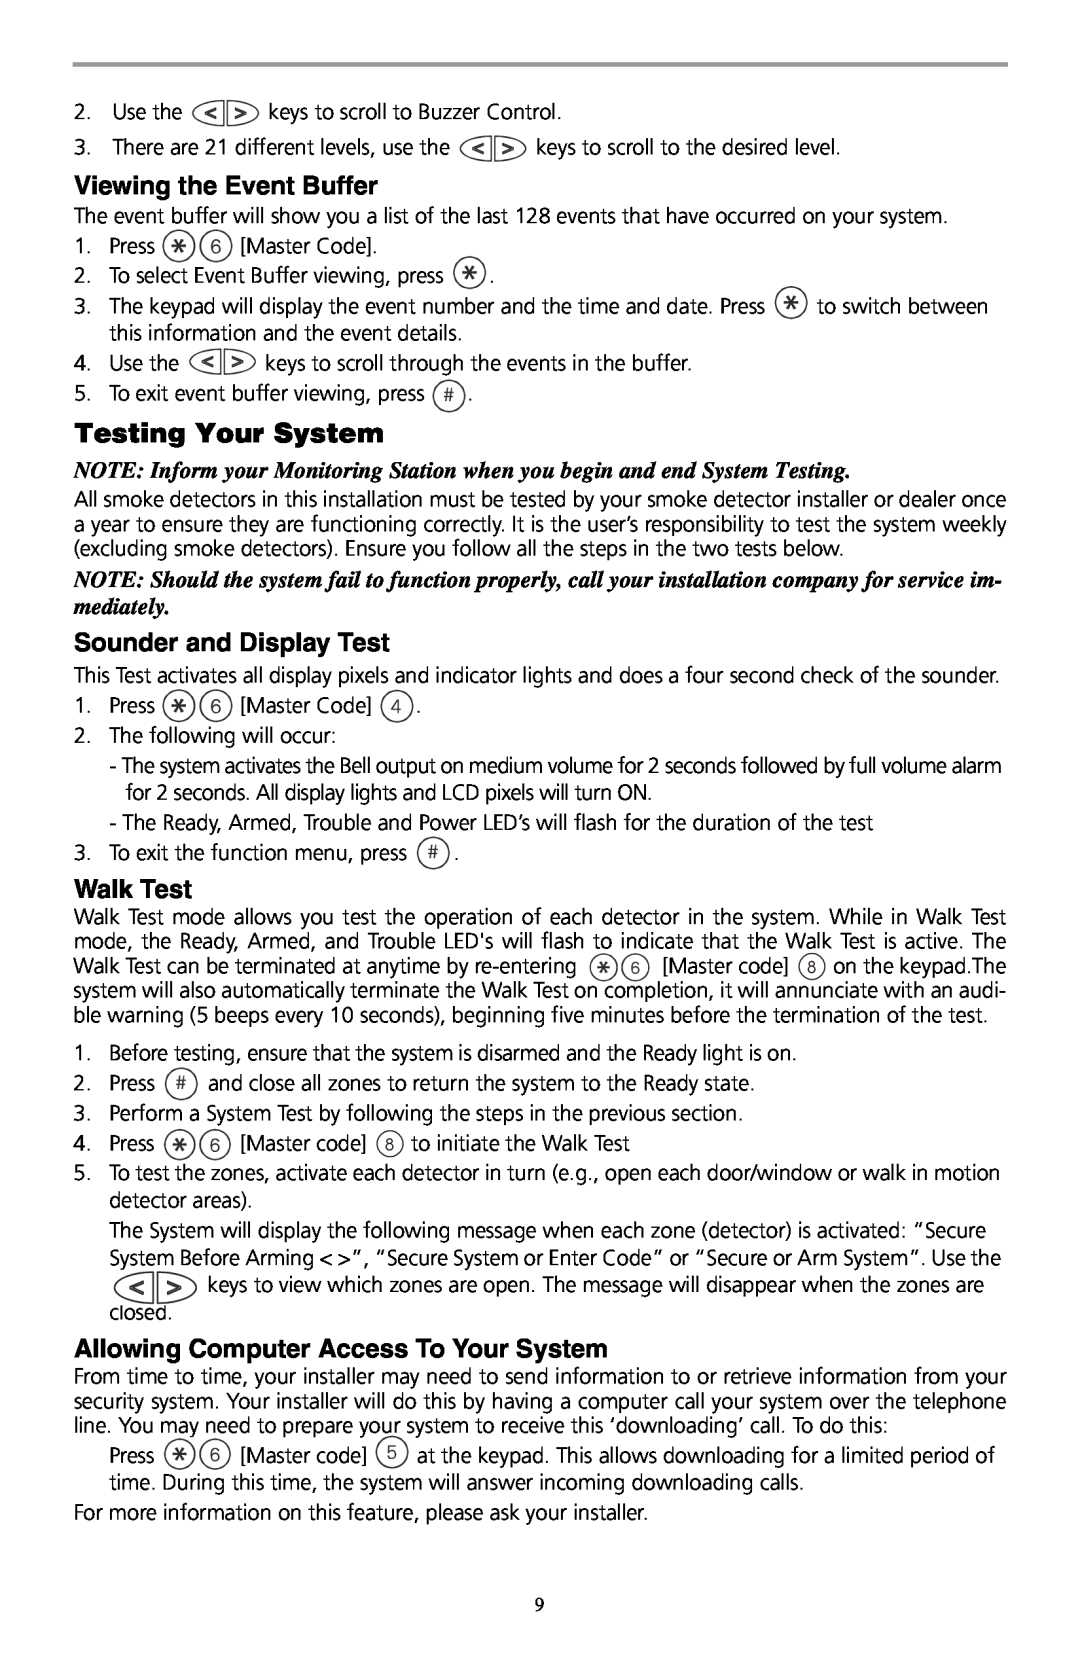 ADT Security Services SCW9047-433 manual Viewing the Event Buffer, Testing Your System, Sounder and Display Test, Walk Test 